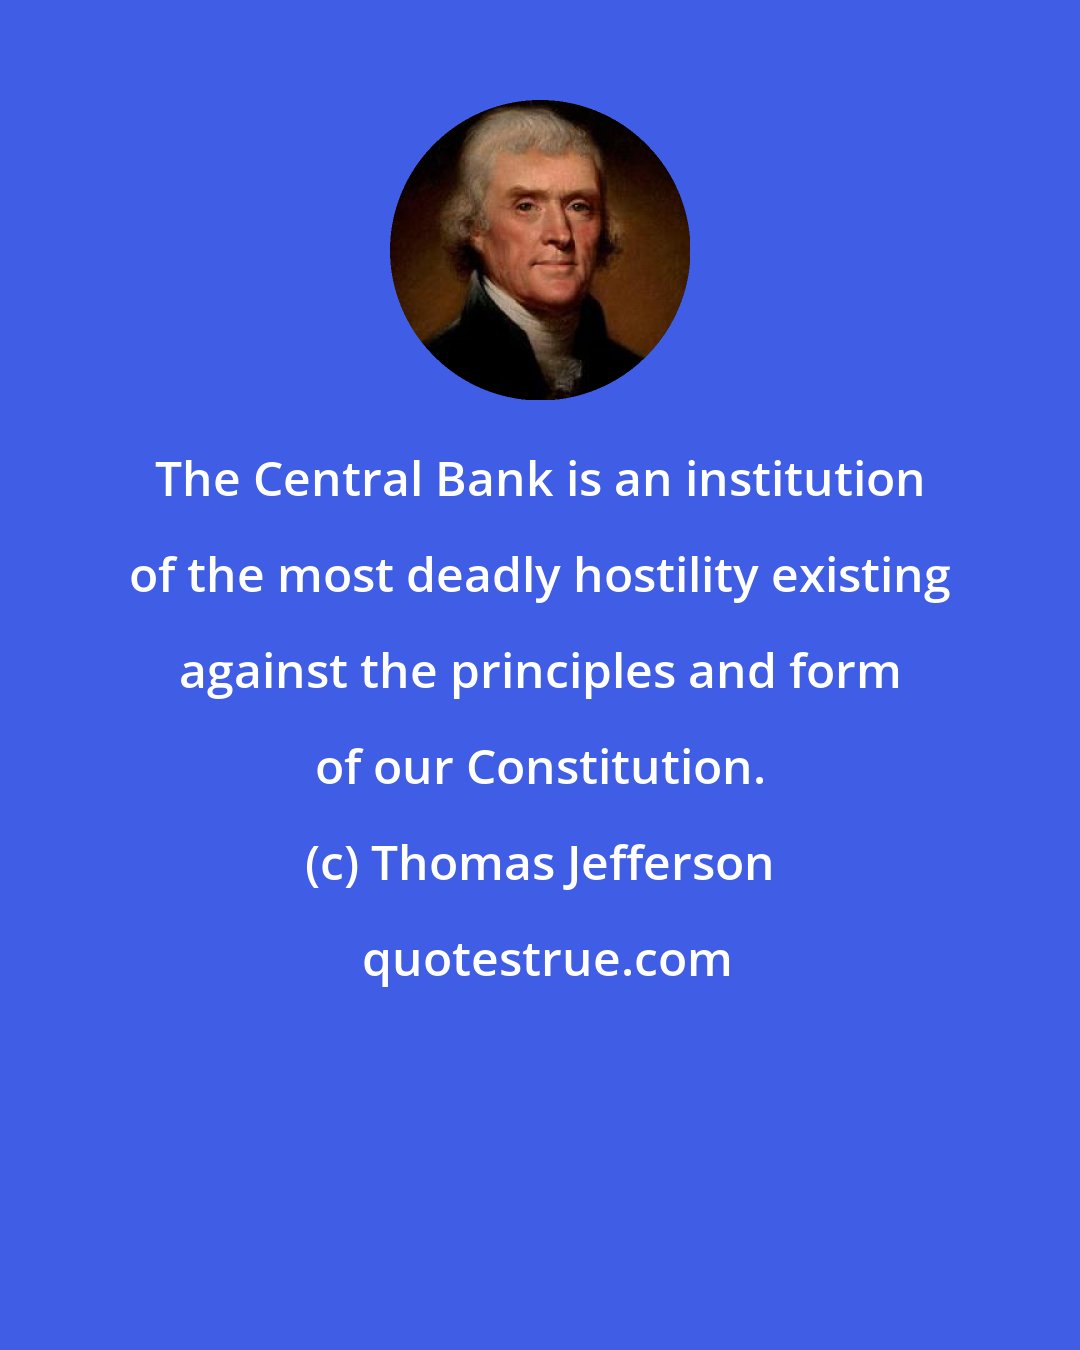 Thomas Jefferson: The Central Bank is an institution of the most deadly hostility existing against the principles and form of our Constitution.